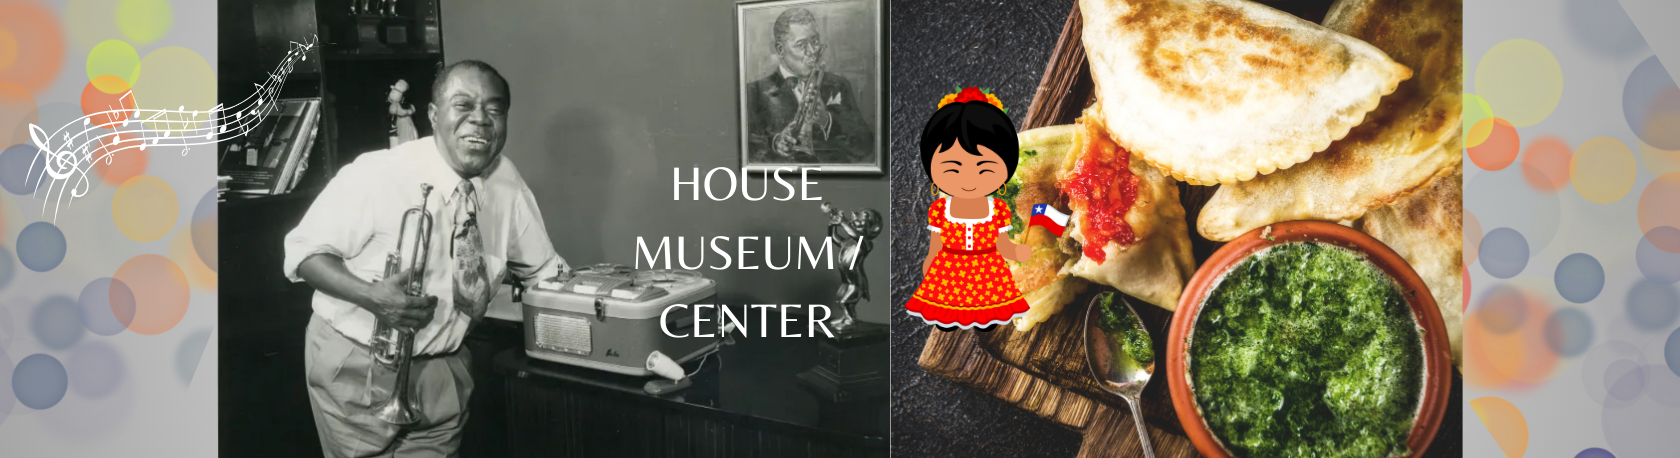 Live the Spanish Language with Our Guided Tour in Corona: Louis Armstrong Museum/Center + Chilean Food - Speak Spanish - Corona, Queens Tour - Practice Spanish - Spanish Guided Tour - Talk in Spanish - Easy Español